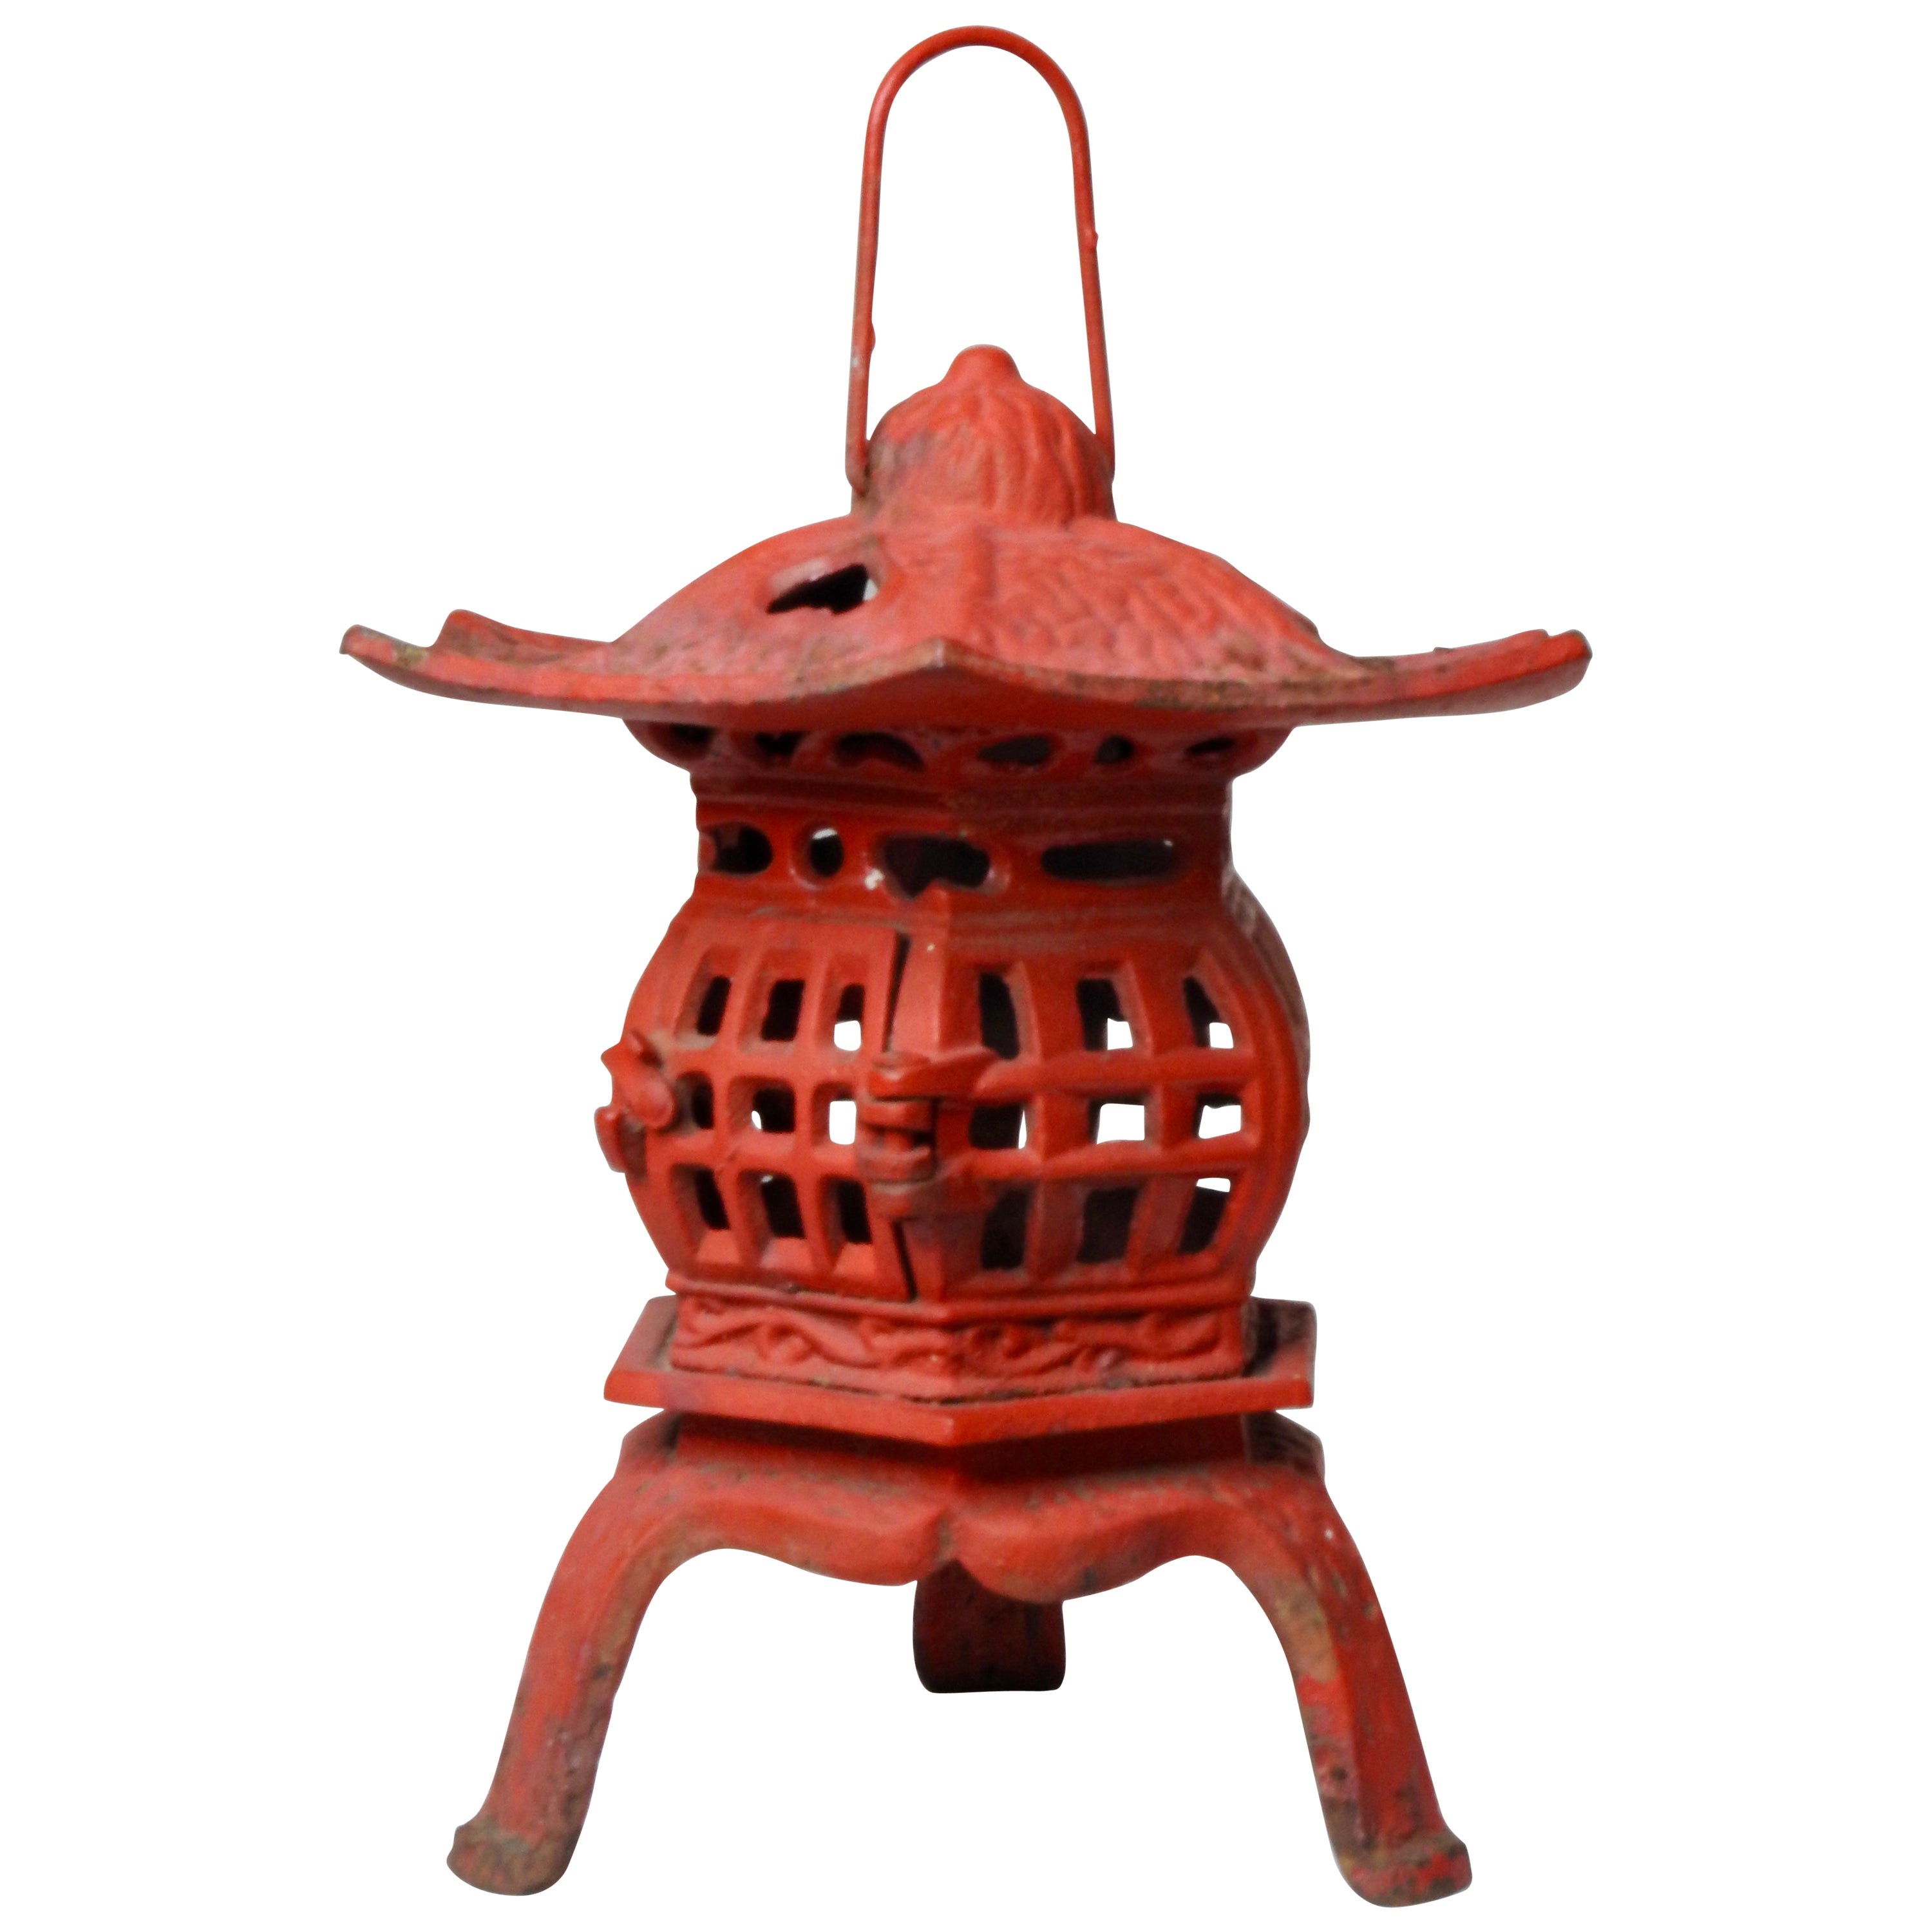 Details about   Elegant Vintage Style Red Iron Pagoda Candle Lantern Hanging Asian Oriental 